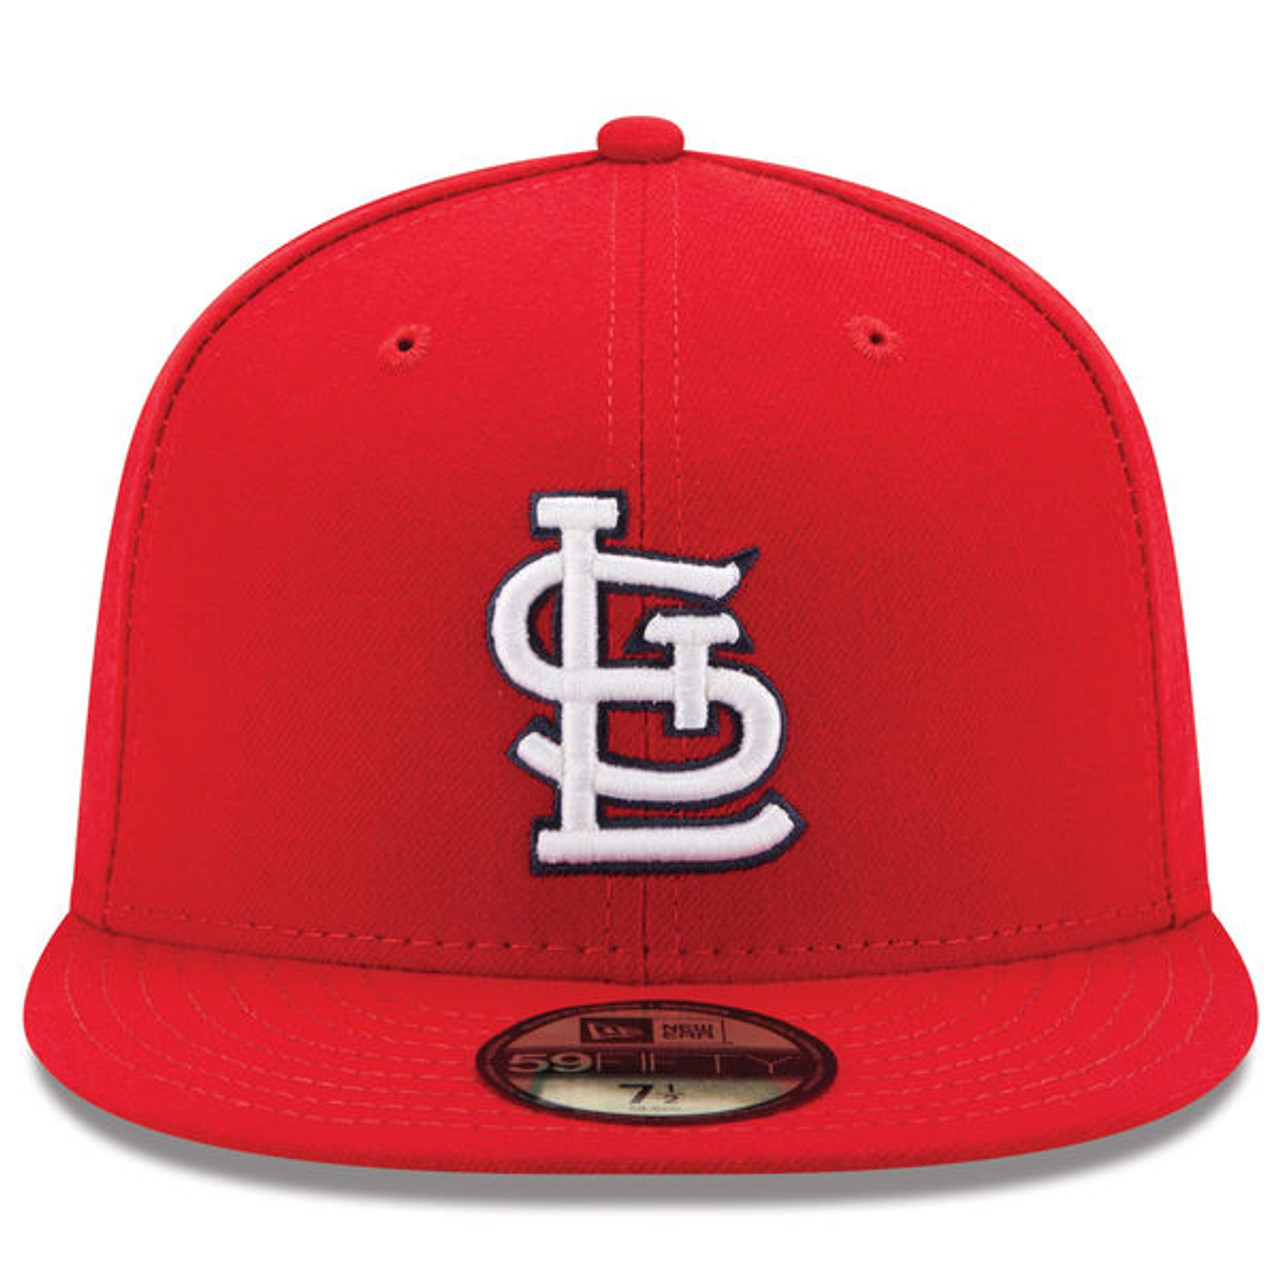 St. Louis Cardinals New Era 59FIFTY Fitted Hat - Royal